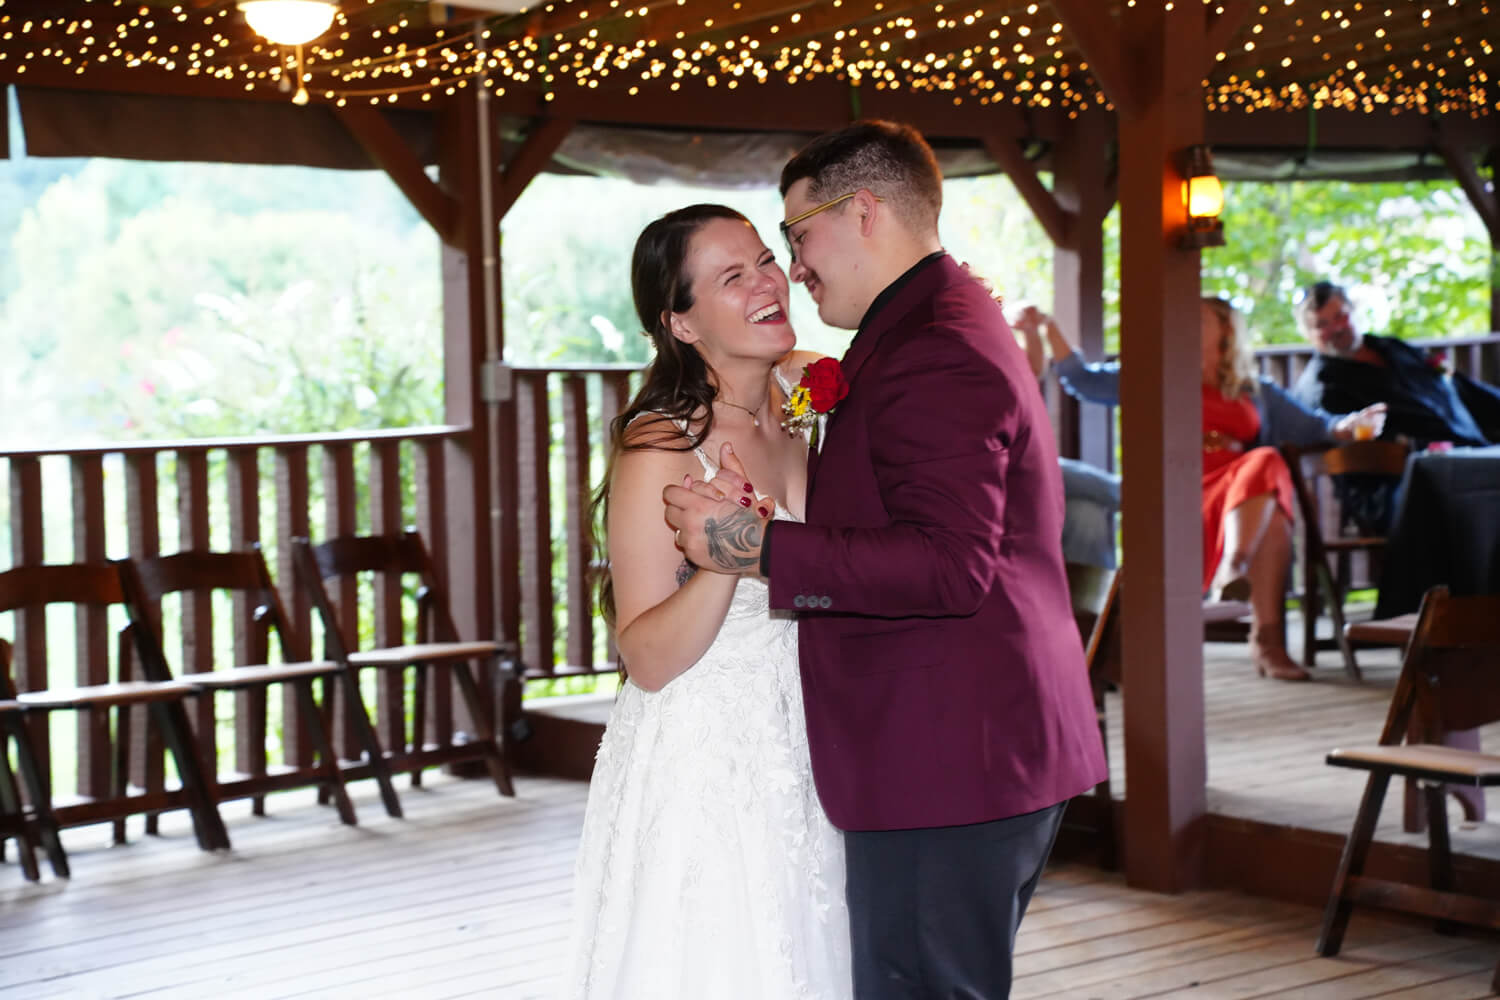 Bride and groom doing their first dance in a country pavilion with string lights